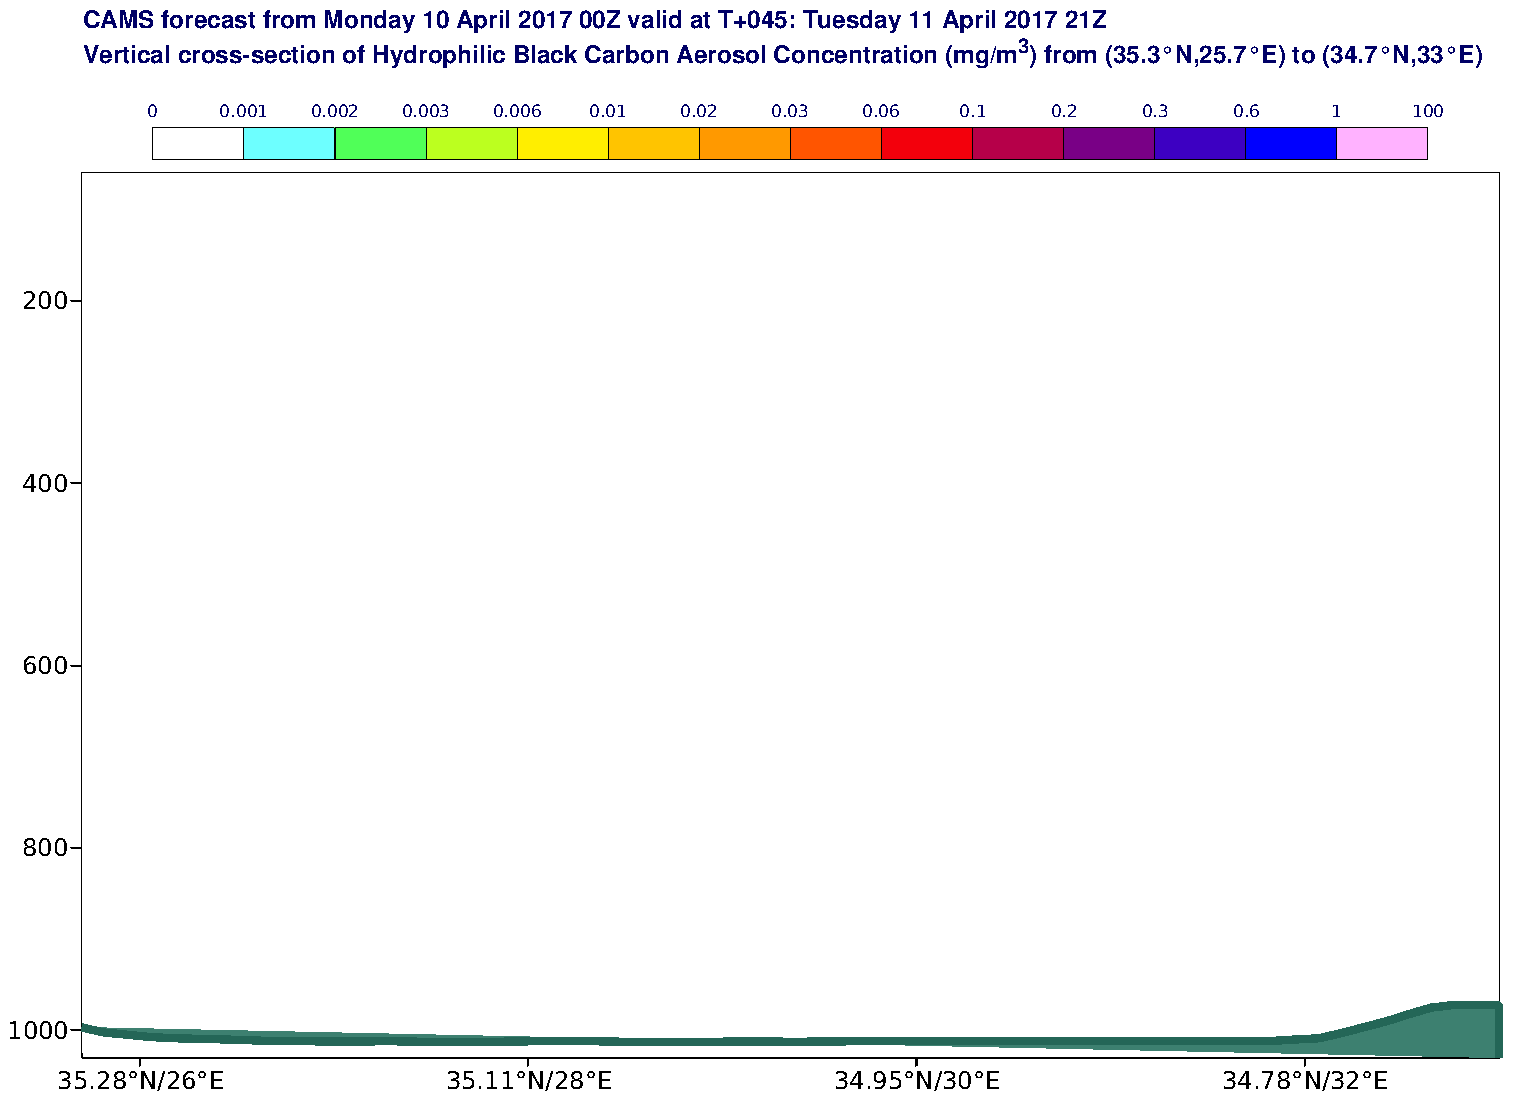 Vertical cross-section of Hydrophilic Black Carbon Aerosol Concentration (mg/m3) valid at T45 - 2017-04-11 21:00